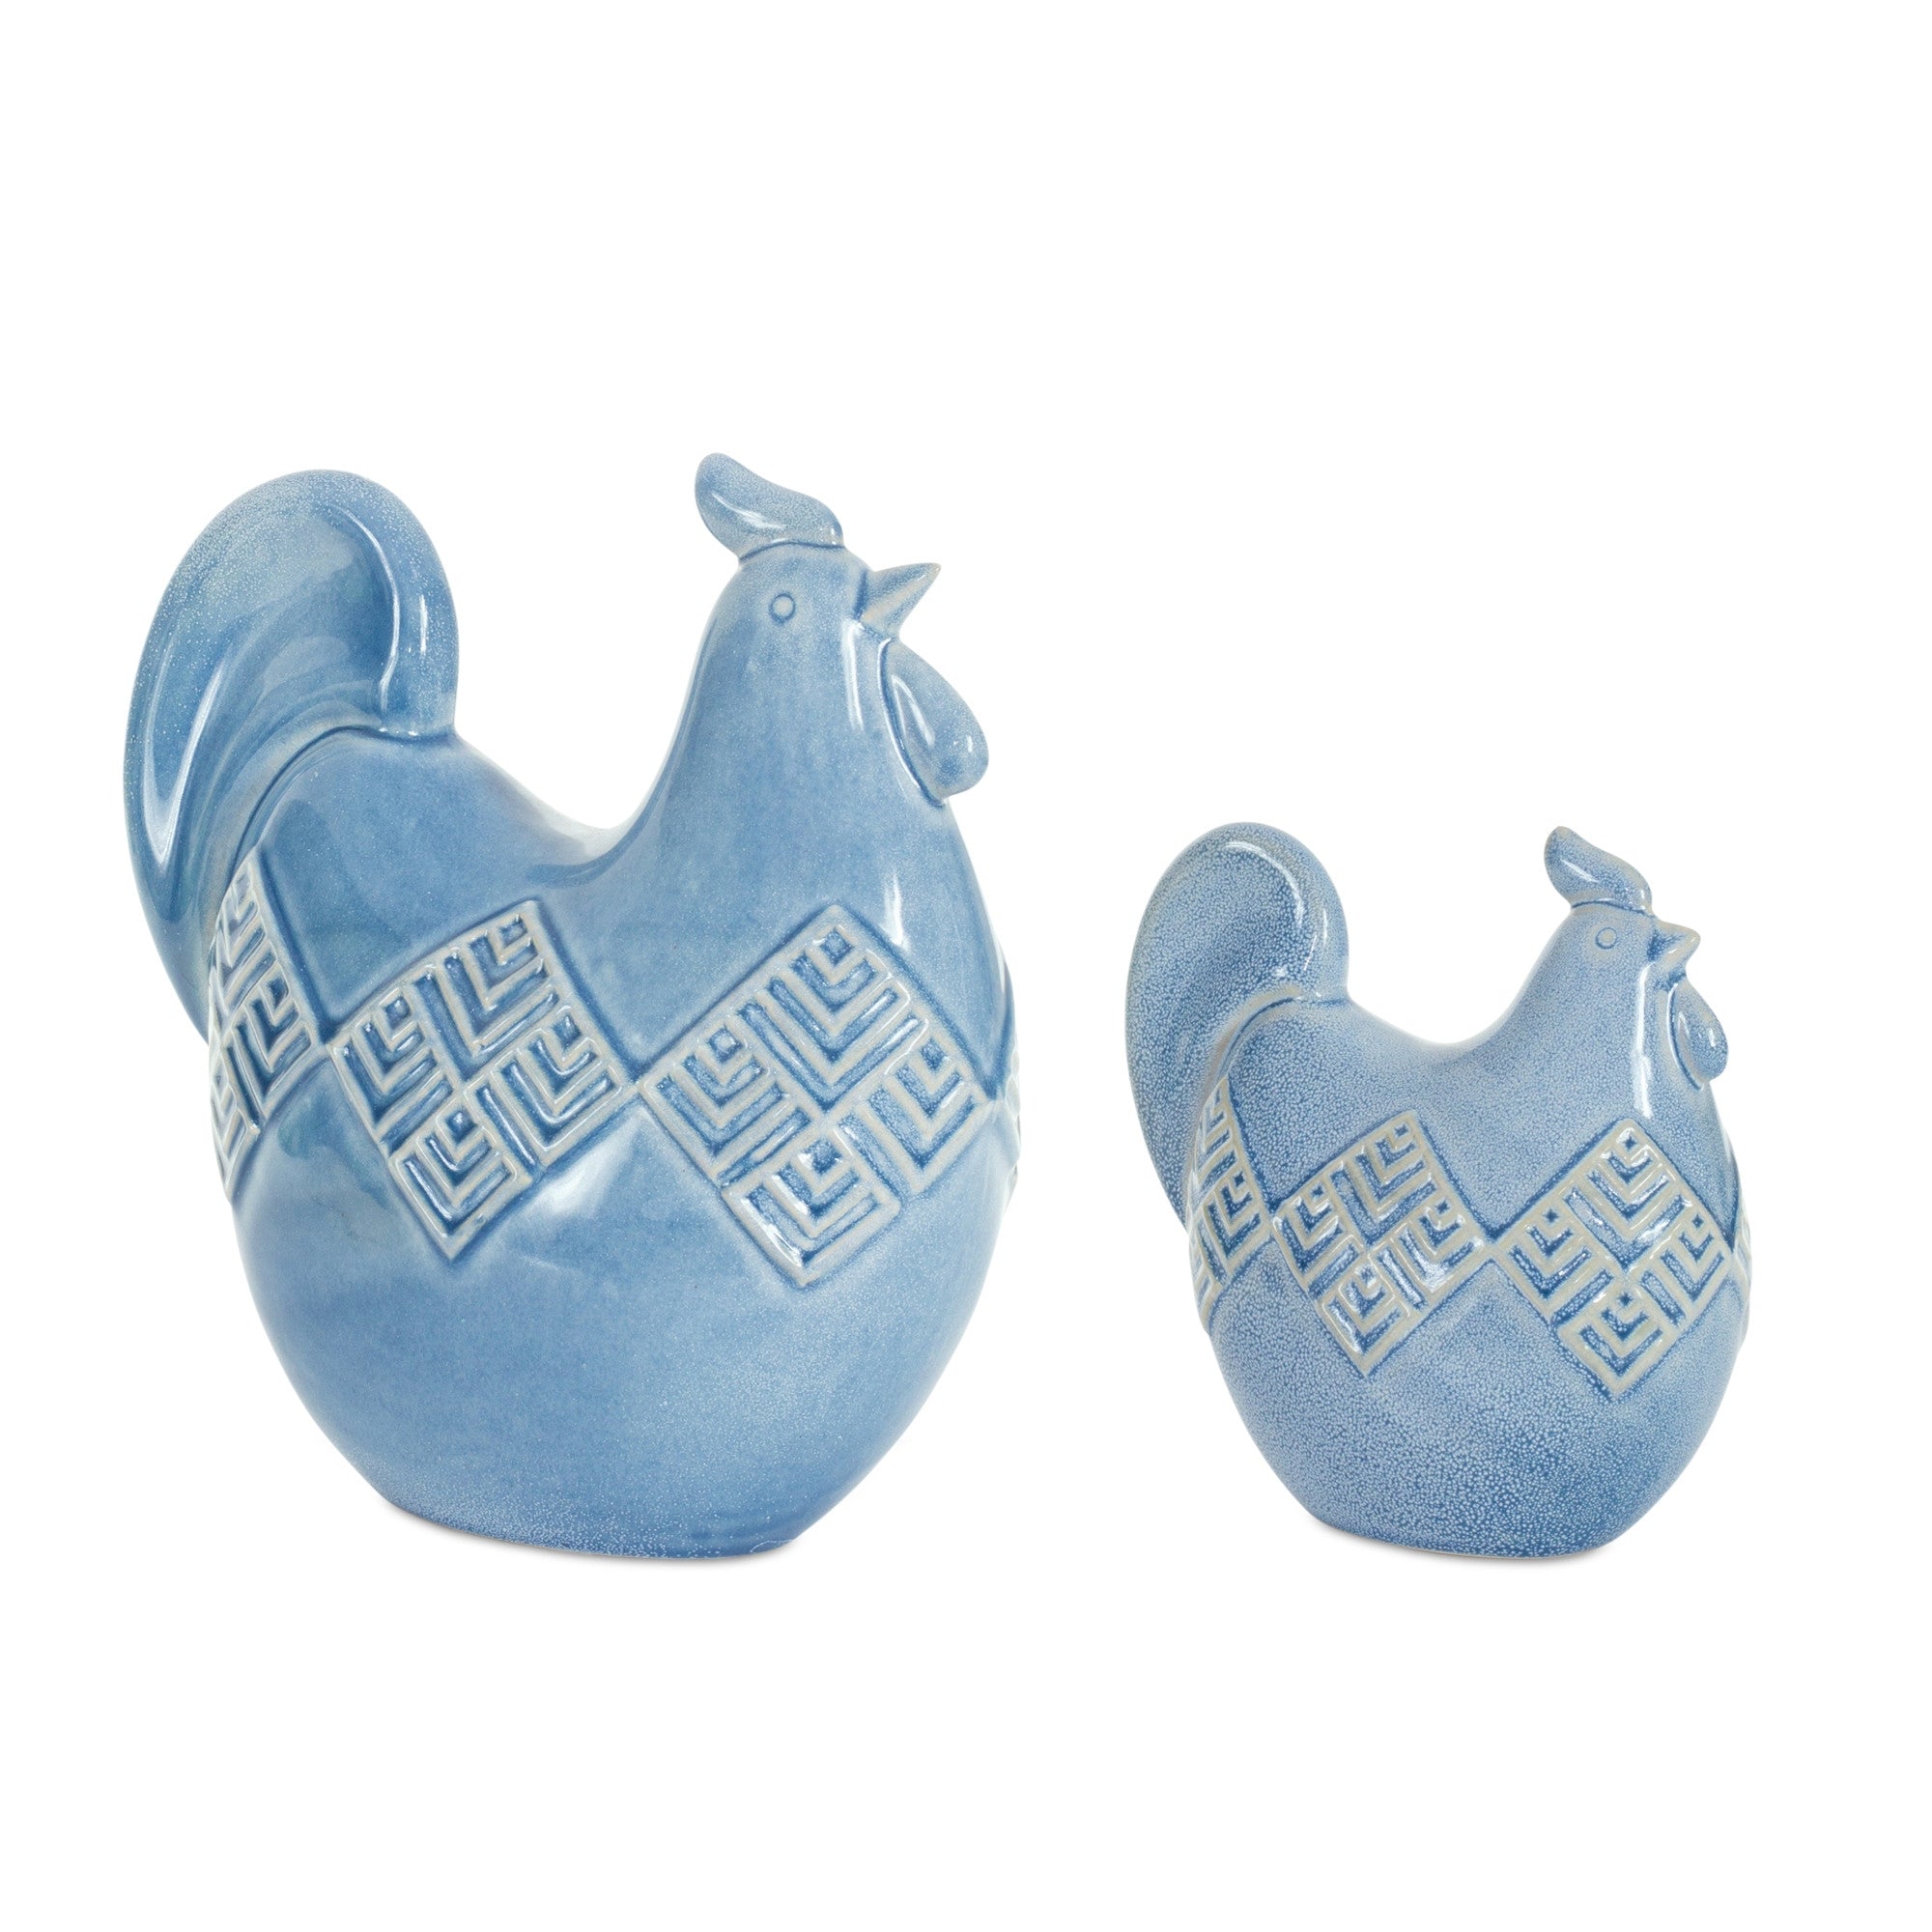 Set Of Two 8" Blue Ceramic Rooster Bird Figurine